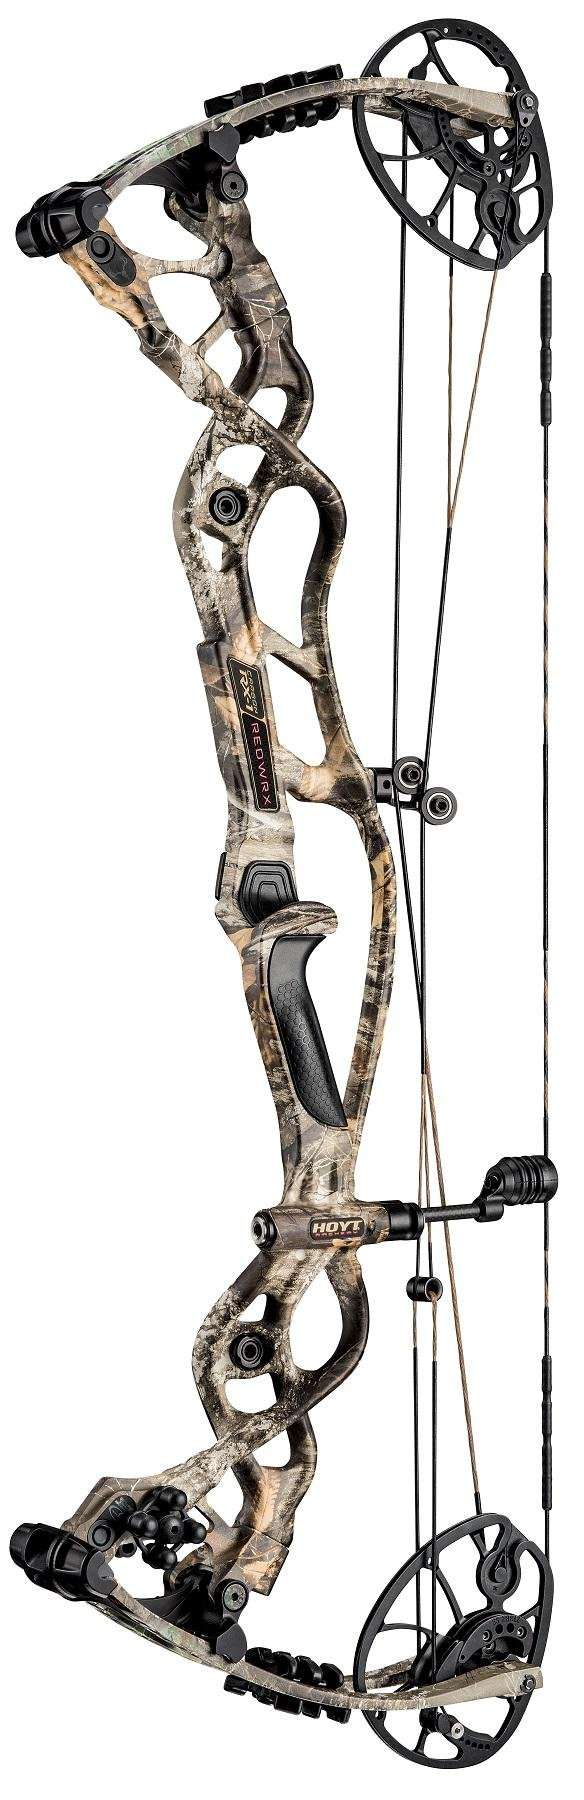 Hoyt REDWRX Carbon RX-1 Series in Realtree Edge 